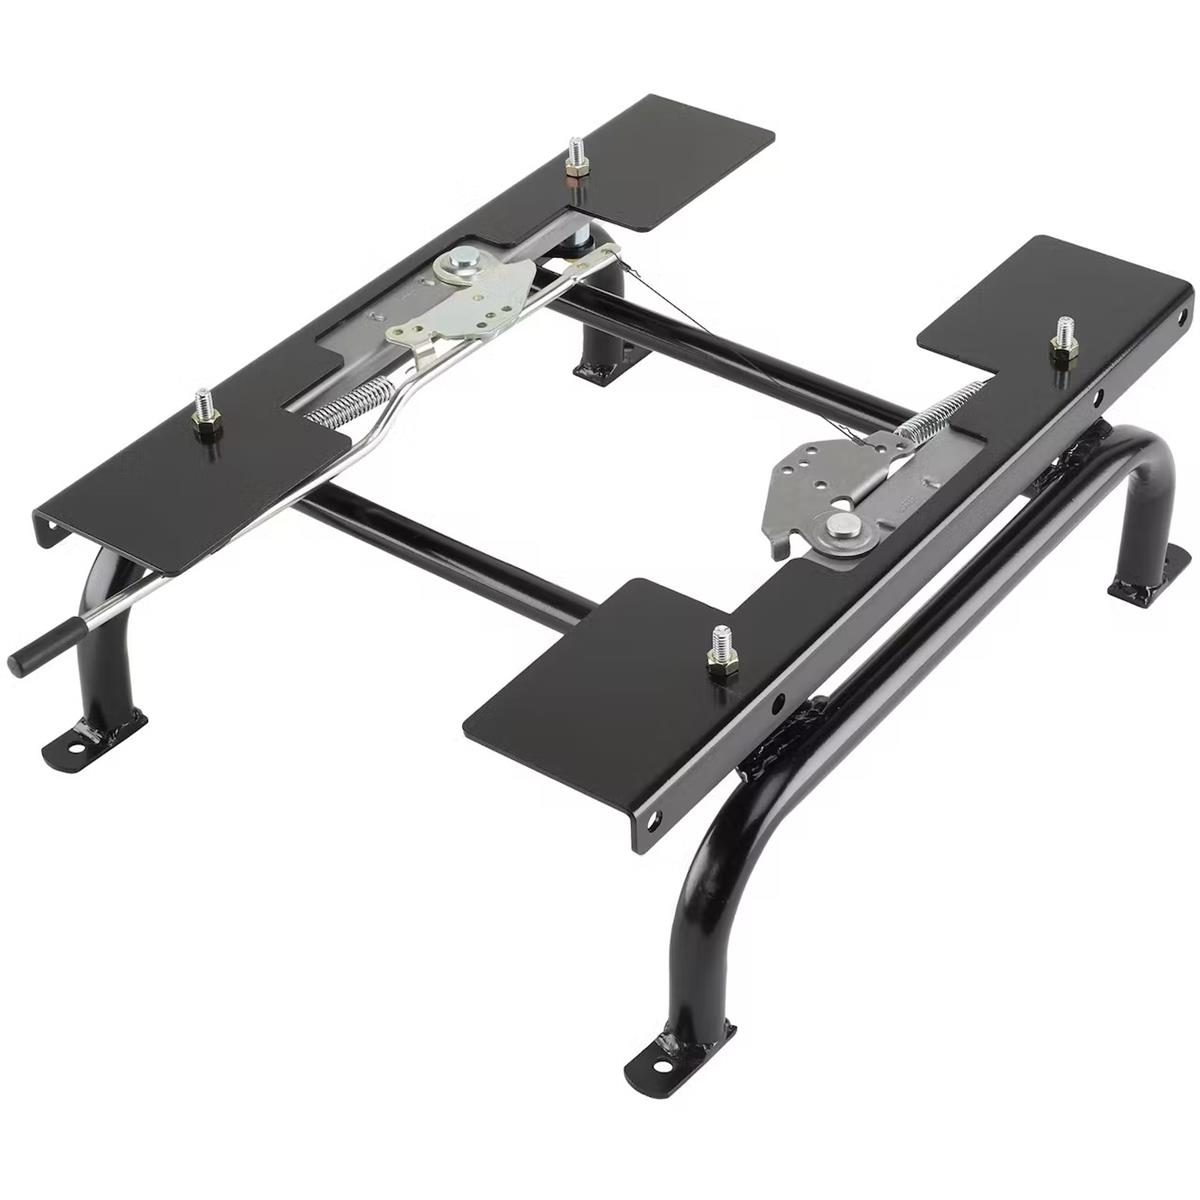 COM-5753 | COM-5753 Universal Seat Mounting Frame with Slider and Mounts Common Application.jpg